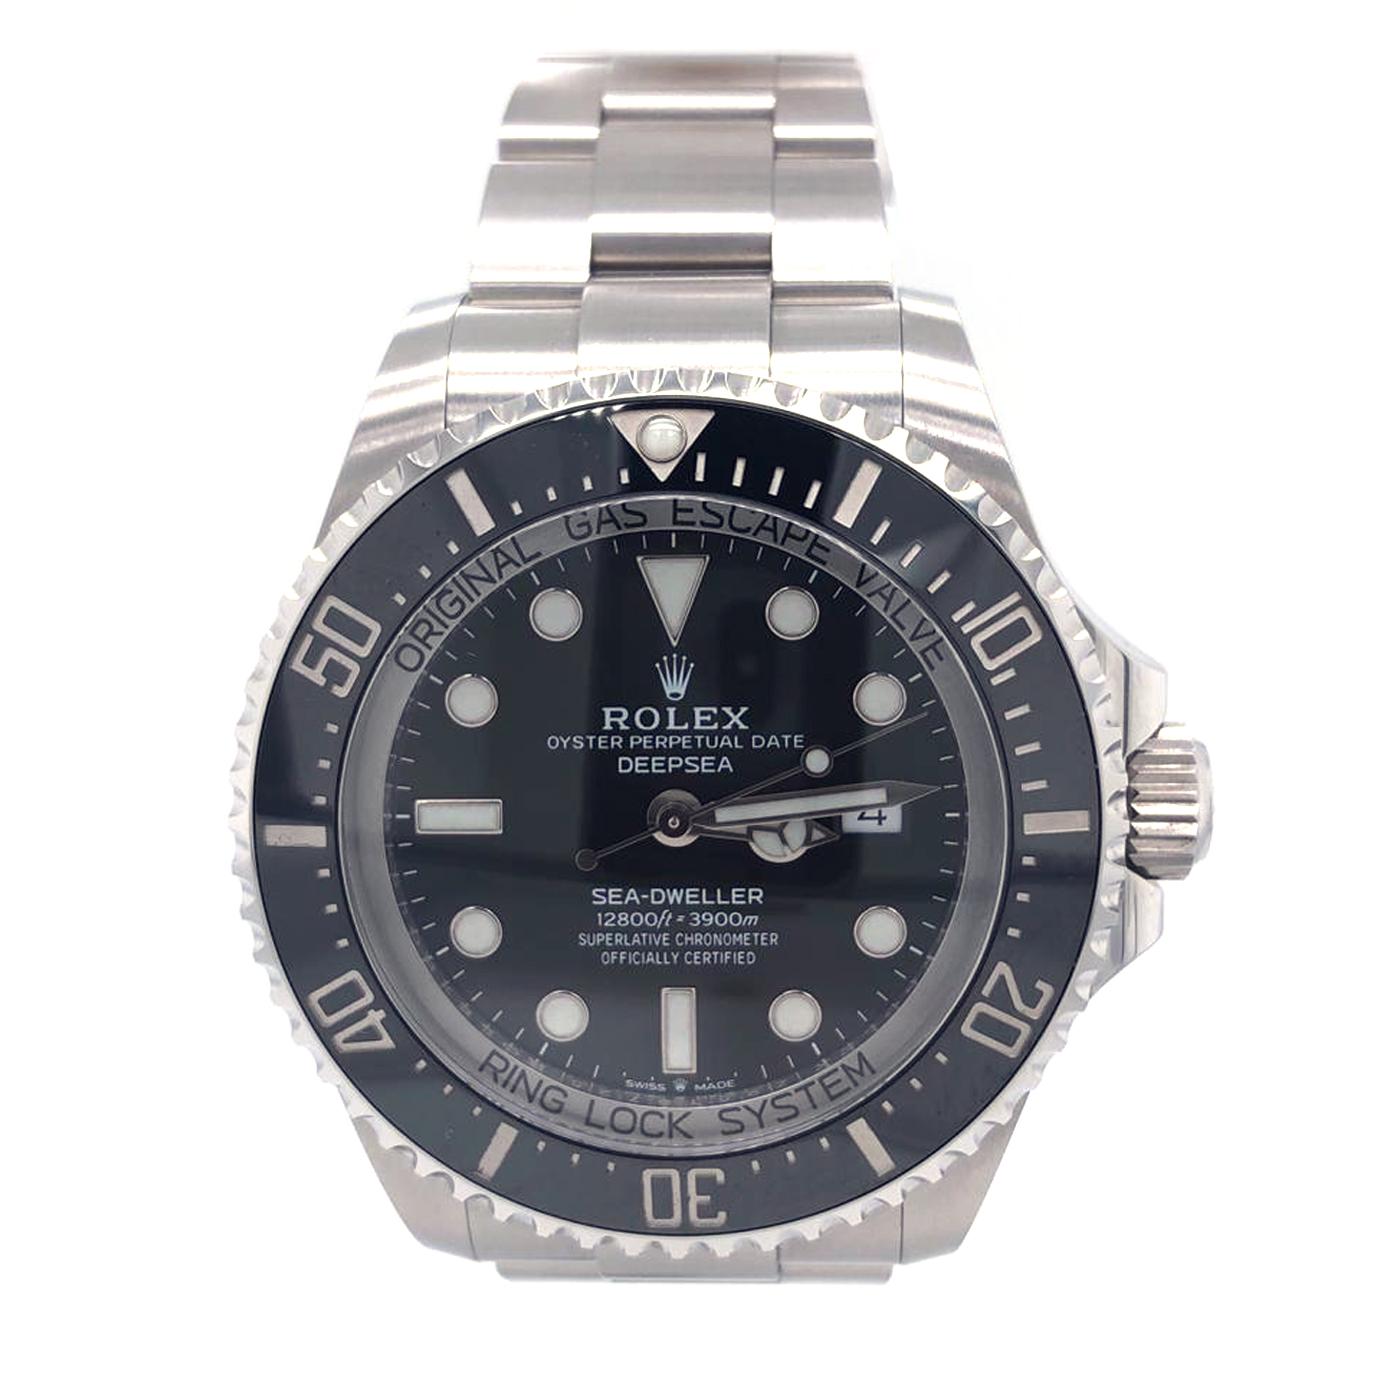 Brand: Rolex
Model Name: Rolex Seadweller Deepsea 44 Black Dial Steel Men's Watch 126660 Box Card
Model Number: 126660
Year: 2020
Serial Number: Z951xxxx
Gender: Men's
Movement: Officially certified chronometer self-winding movement.
Jewels: